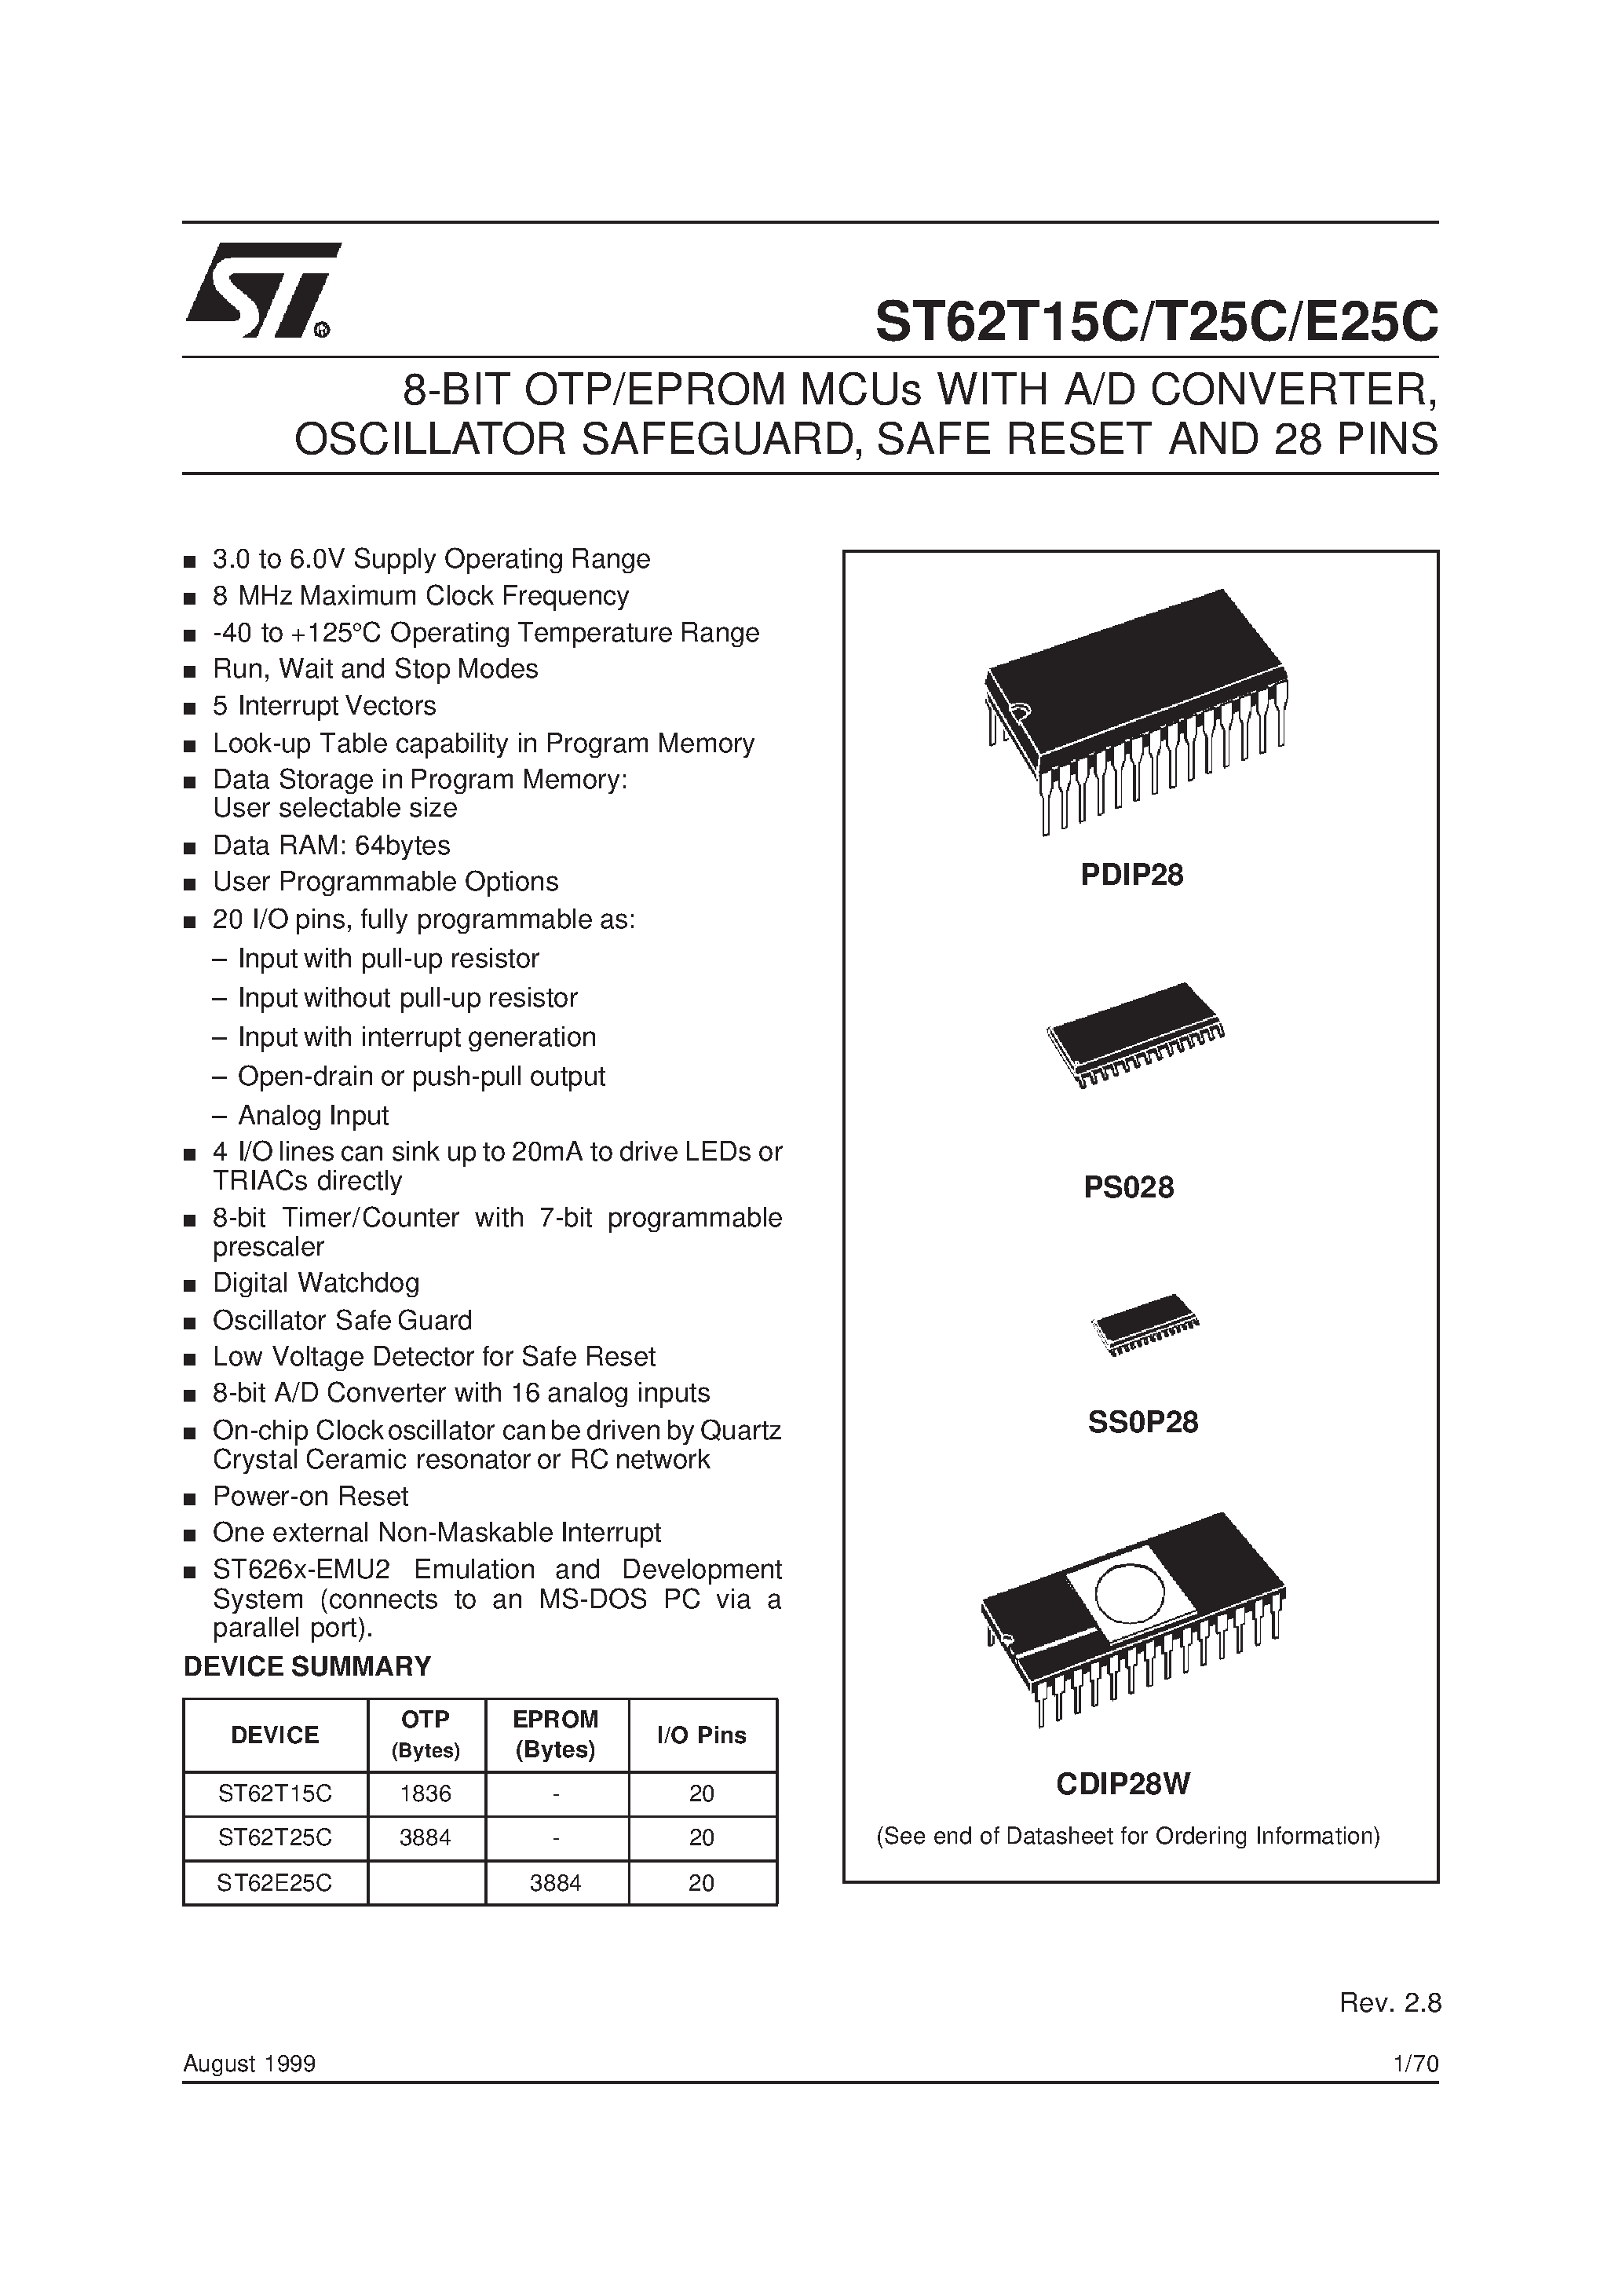 Datasheet ST62E25C - (ST62T15C / ST62T25C) 8-BIT OTP/EPROM MCUs WITH A/D CONVERTER page 1